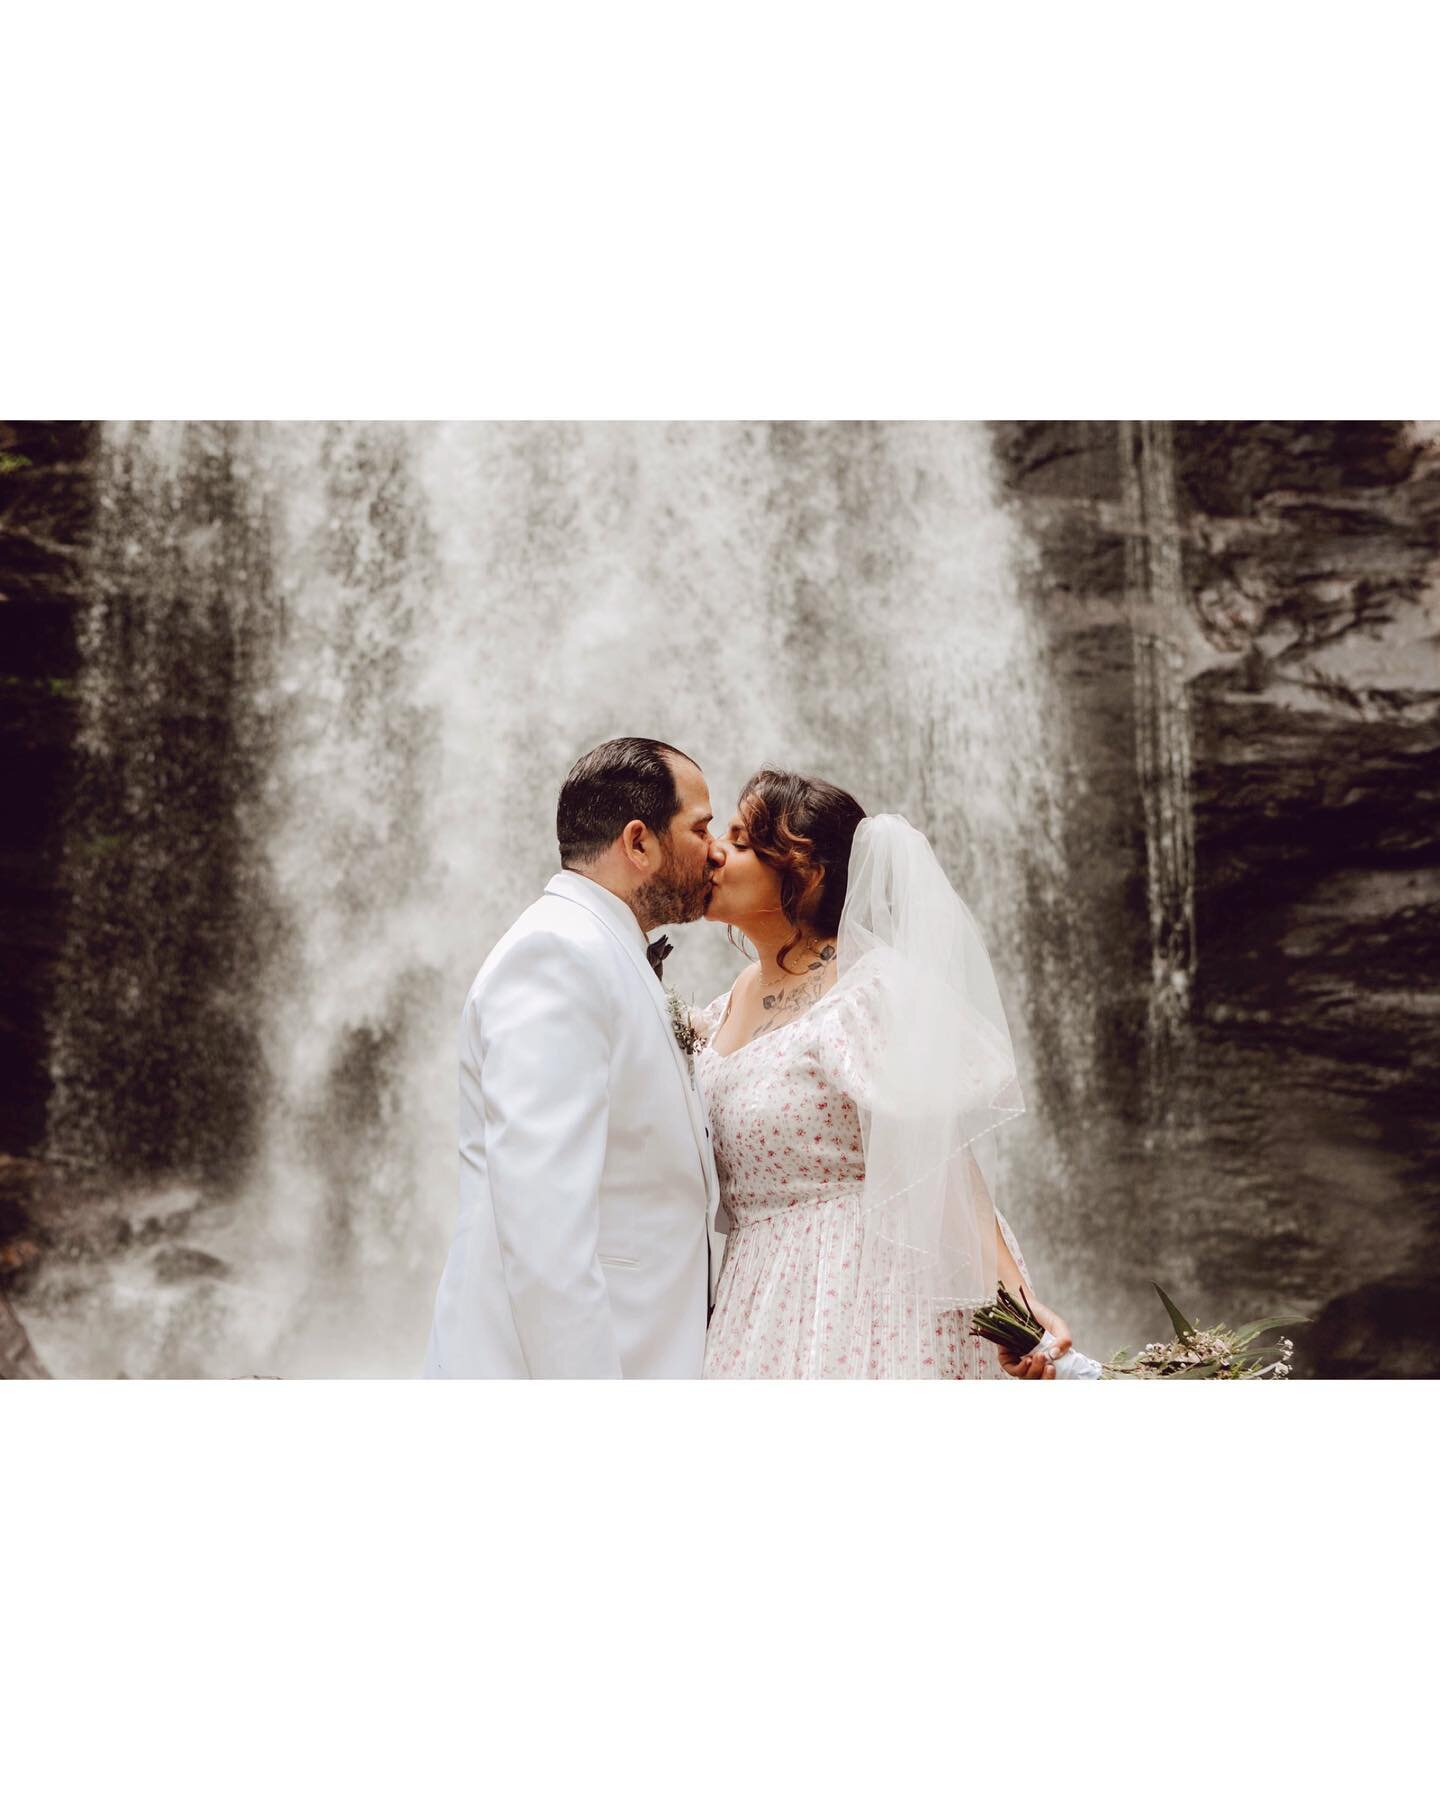 Always a fan of a waterfall elopement. They just hit different &hearts;️
.
.
.
.
.
#elopmentphotographer #elopementplanning #ashevilleelopementphotographer #ashevilleweddingphotographer #elopement